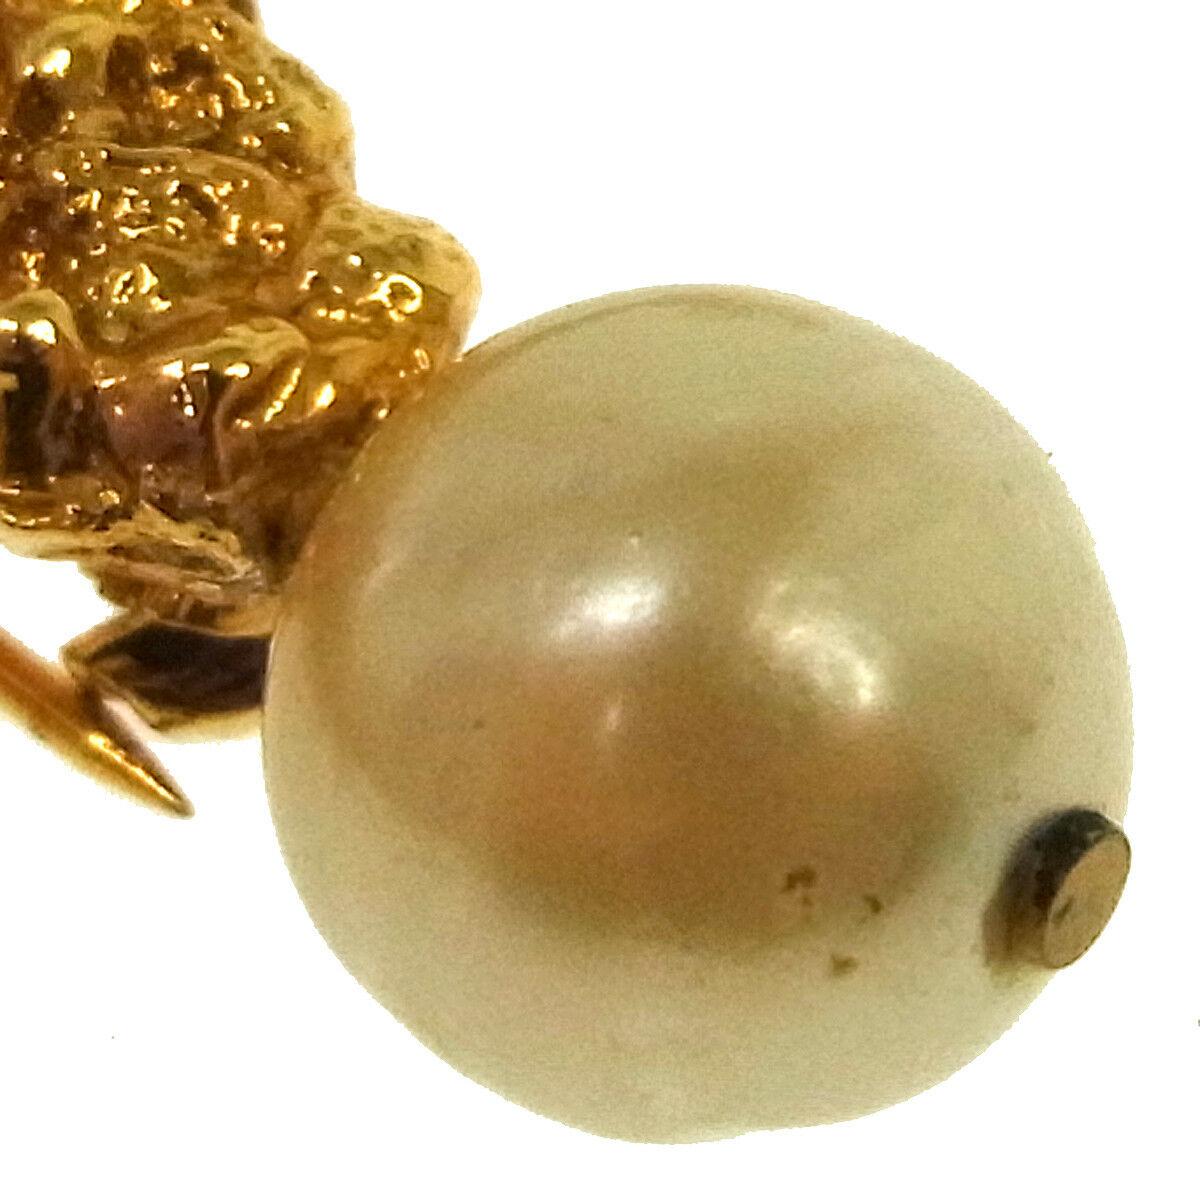 Chanel Gold Textured Pearl Jellyfish Charm Evening Lapel Pin Brooch

Metal
Faux pearl
Gold tone
Date code present
Made in France
Measures 3